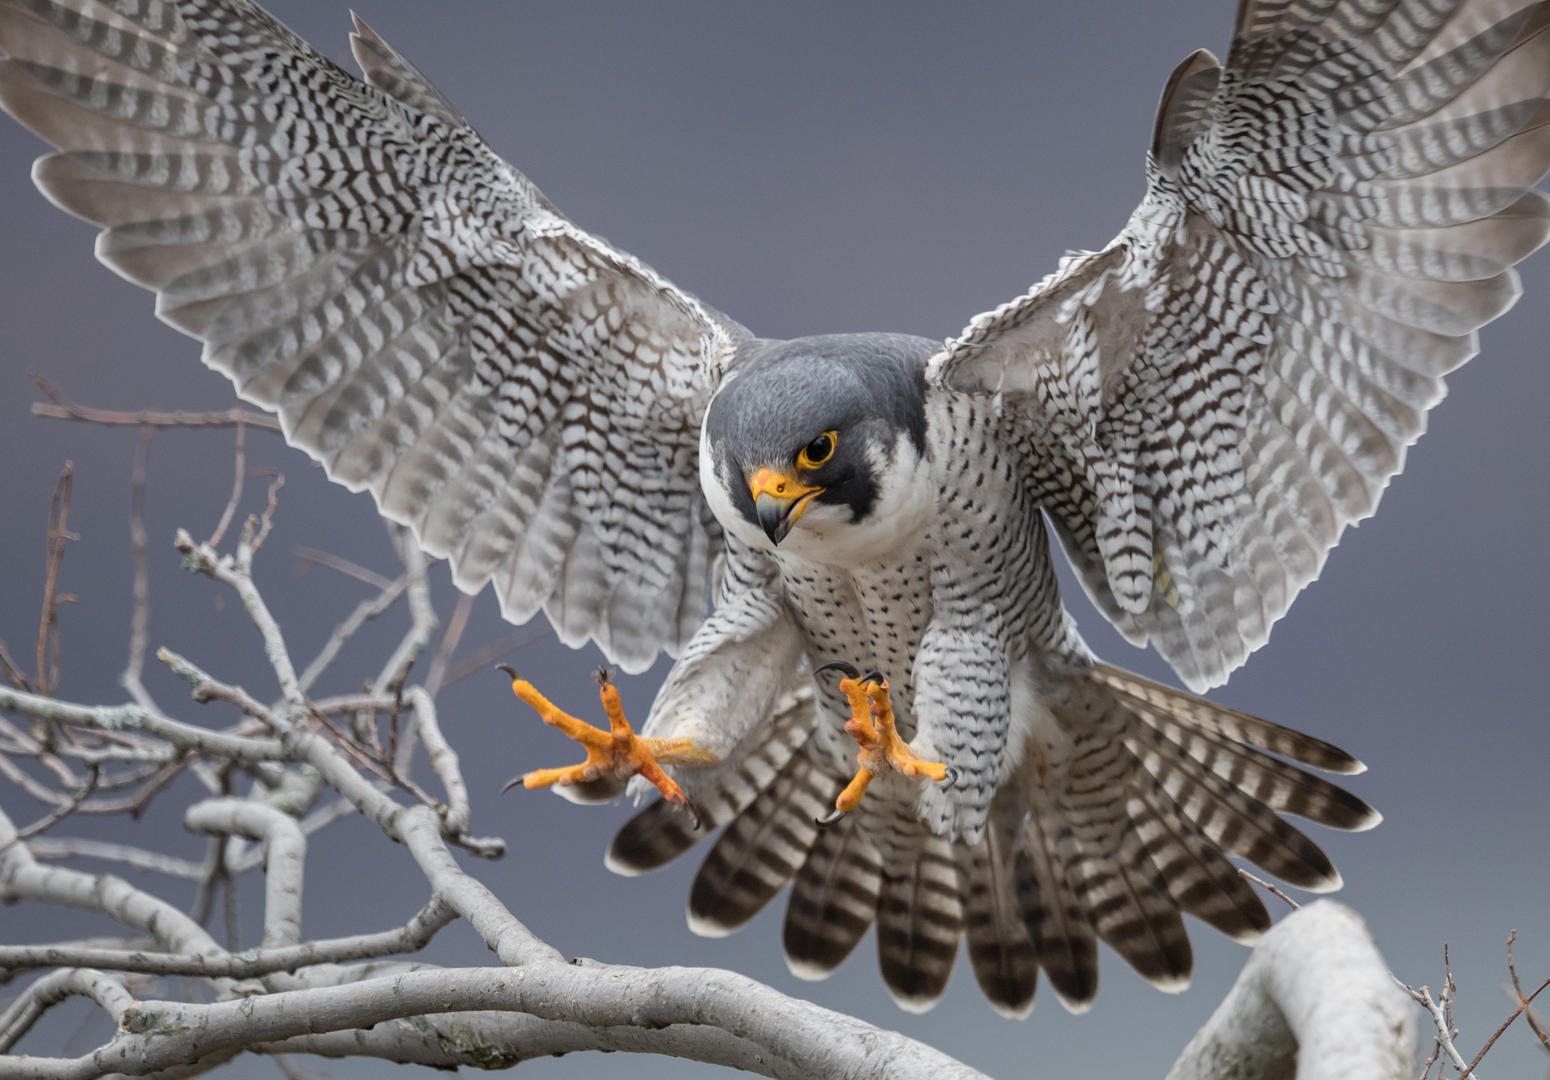 Peregrine Falcon by Harry Collins Photocrowd photo competitions & commu...